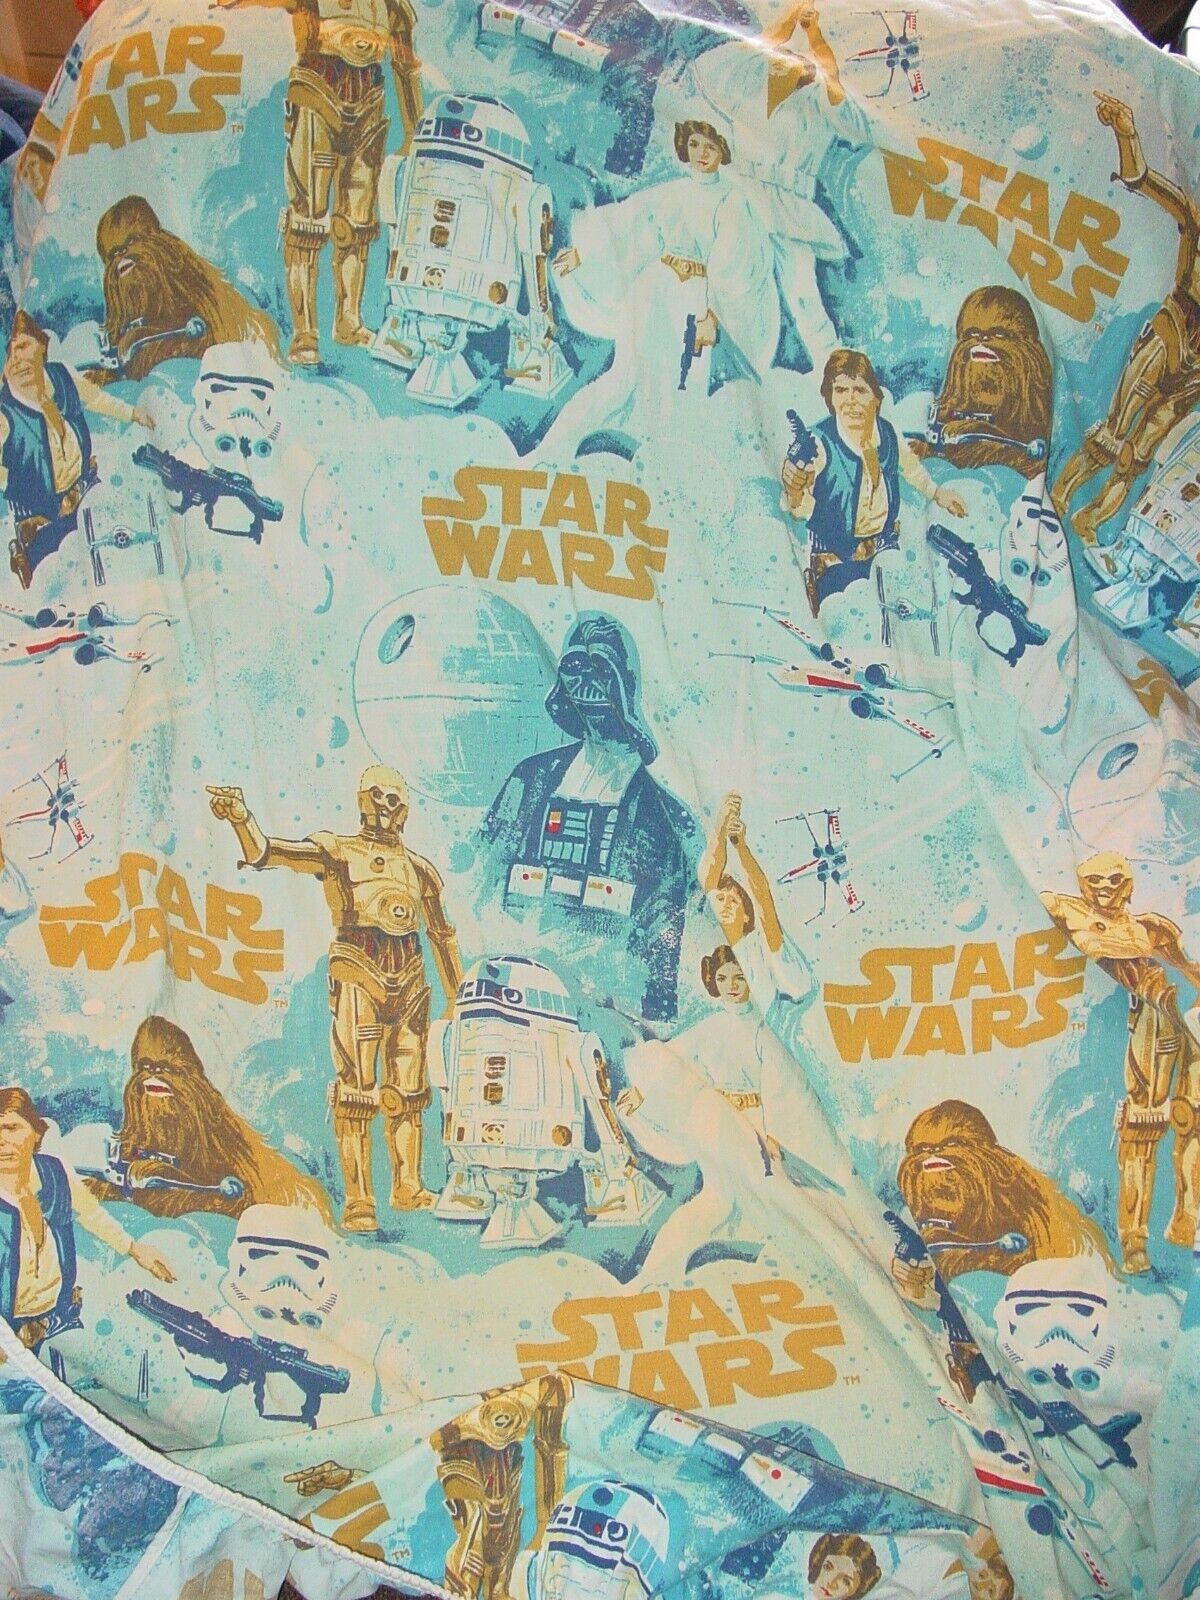 VINTAGE 1977 STAR WARS TWIN SIZE FITTED SHEET - SEE DETAILS AND PHOTOS